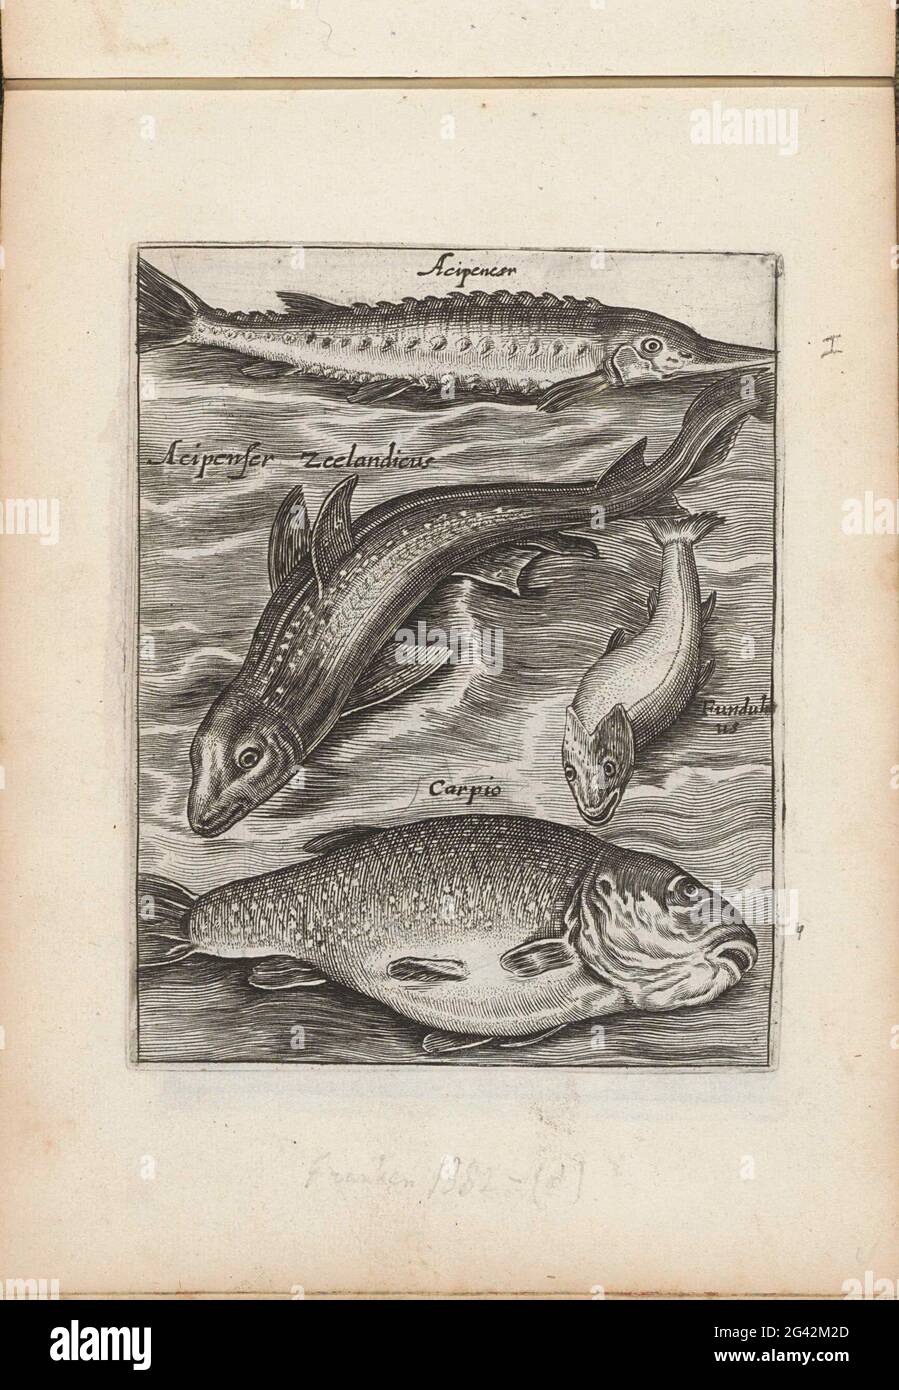 Sturgeon, fundulus and carp; Fishing; PISCIUM VIVAE ICONES. Four fish. From top to bottom a sturgeon, Zeeland sturgeon, a fundulus and carp. With every fish the name in Latin. This print is part of an album. Stock Photo